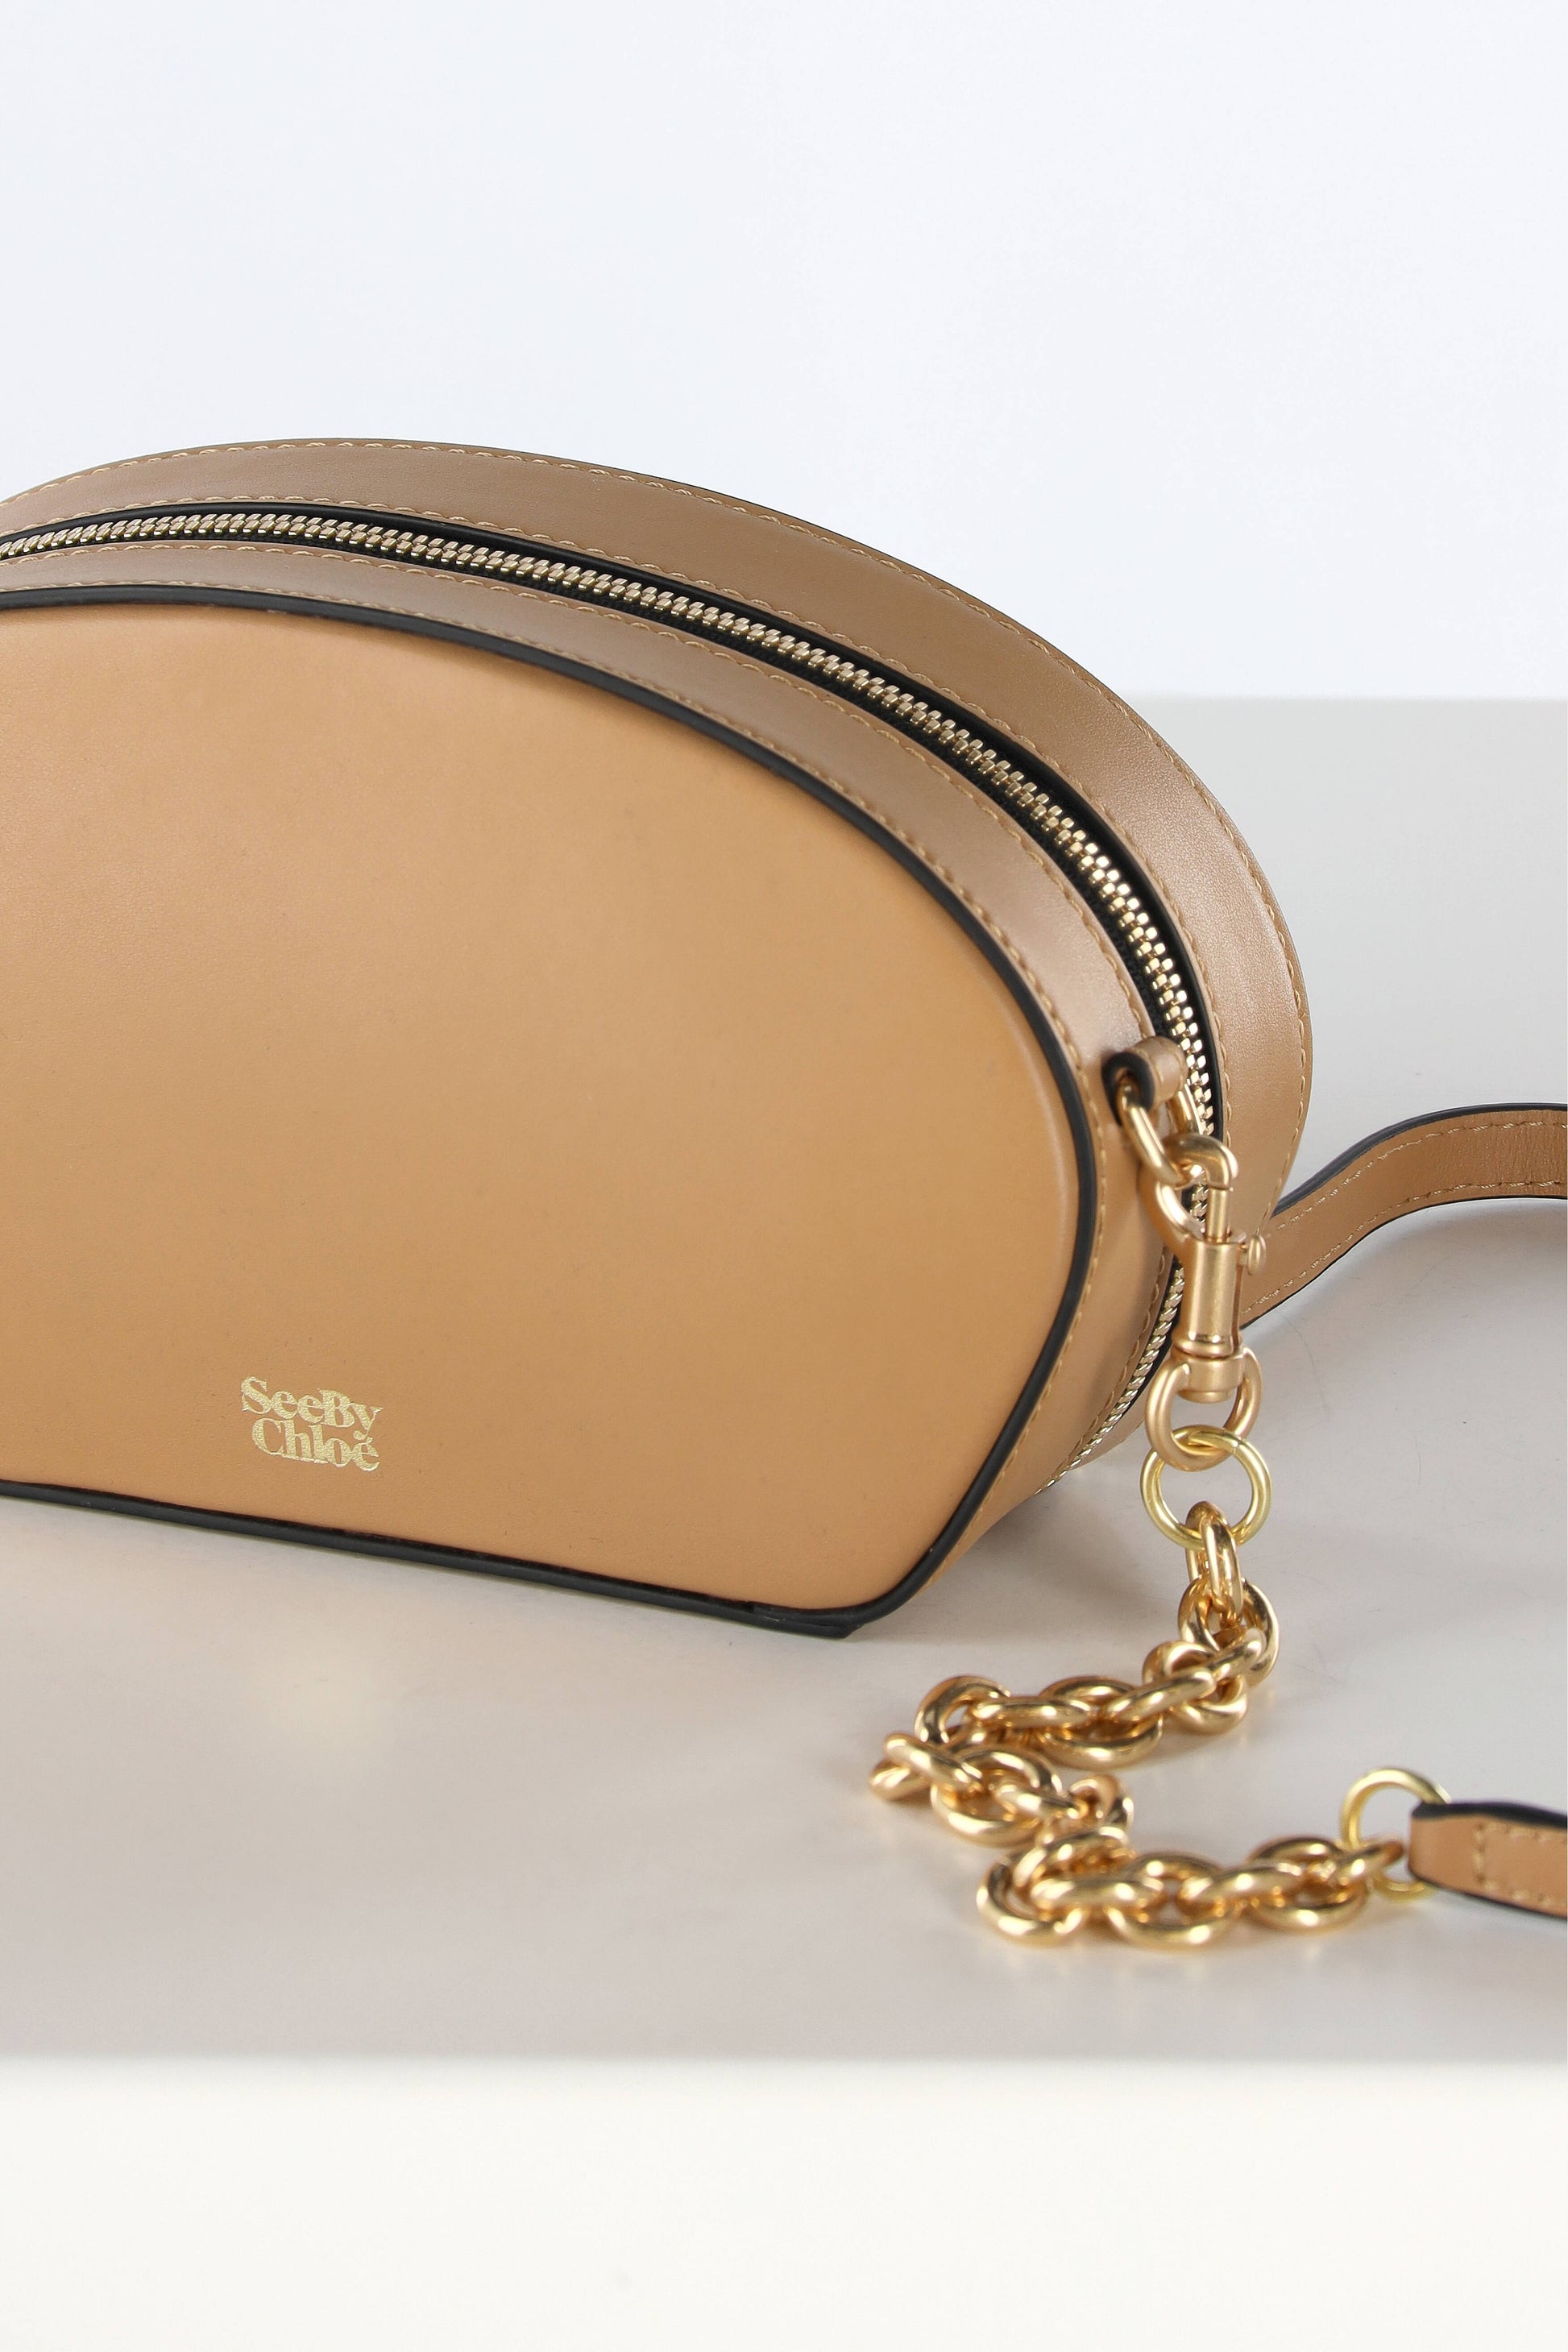 Tasche Shell in Biscotti BeigeSee by Chloé - Anita Hass